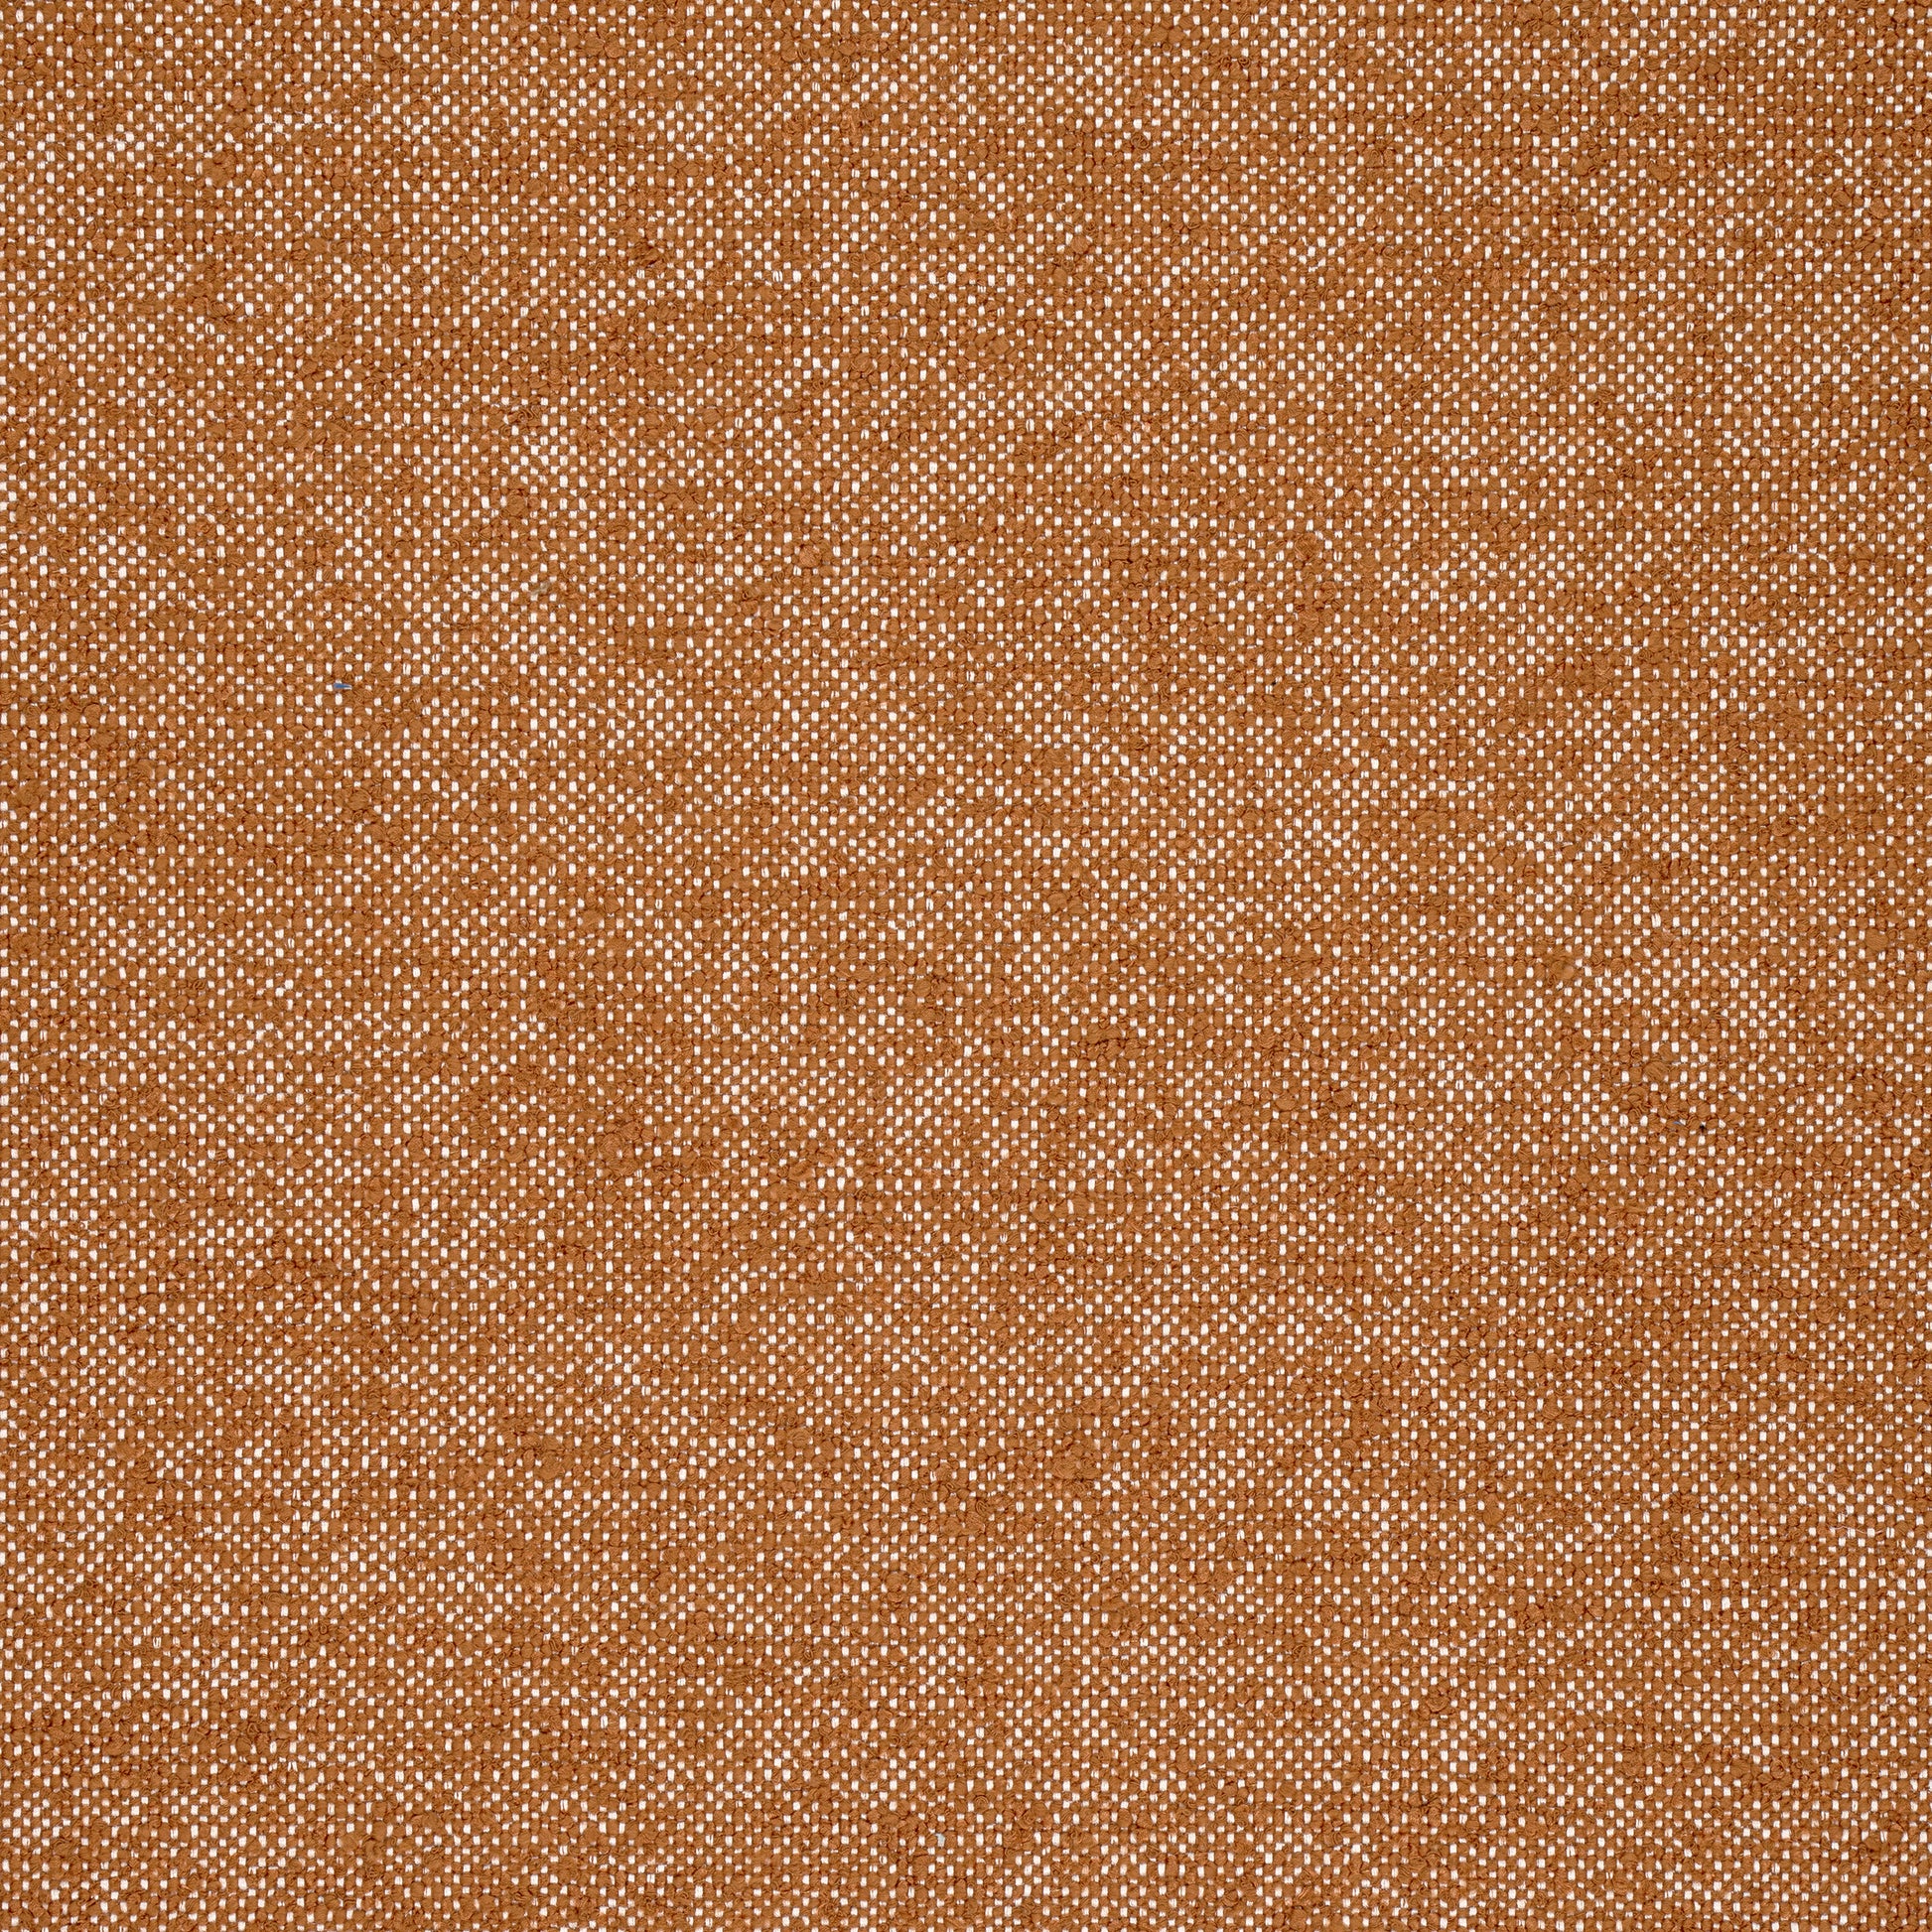 Purchase Thibaut Fabric SKU W77105 pattern name Sasso color Copper